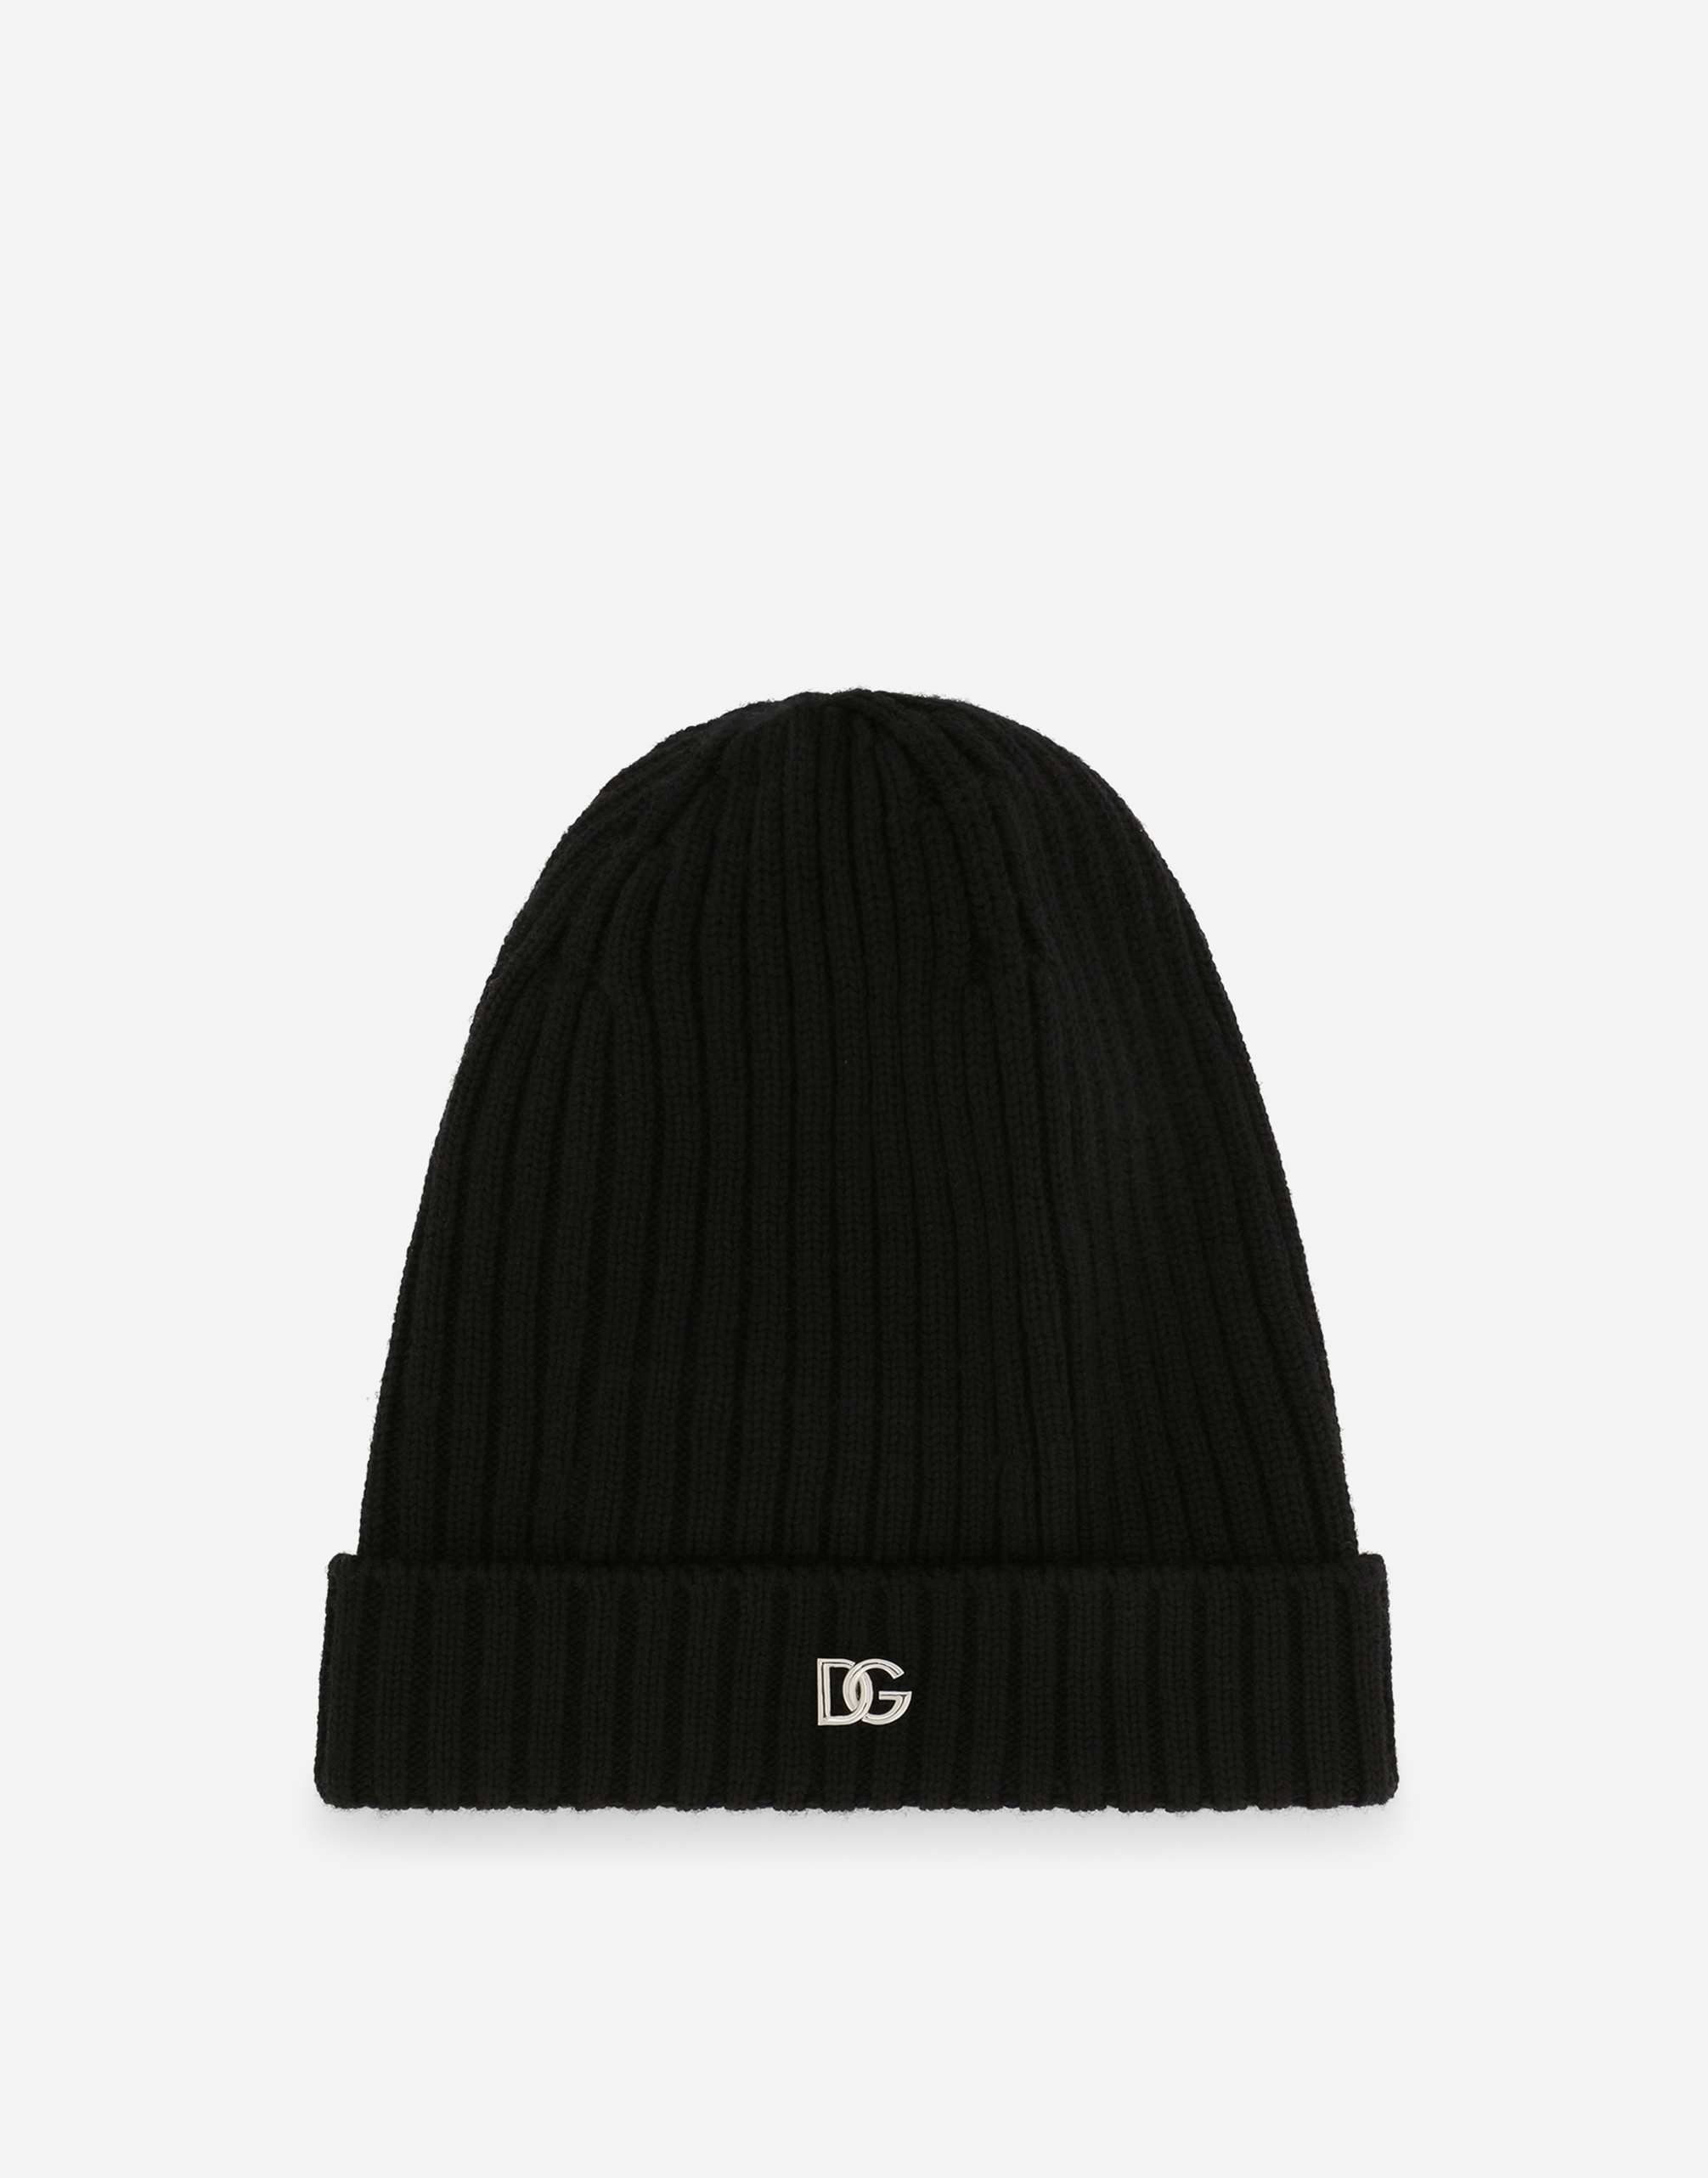 Ribbed knit hat with metal DG logo in Black